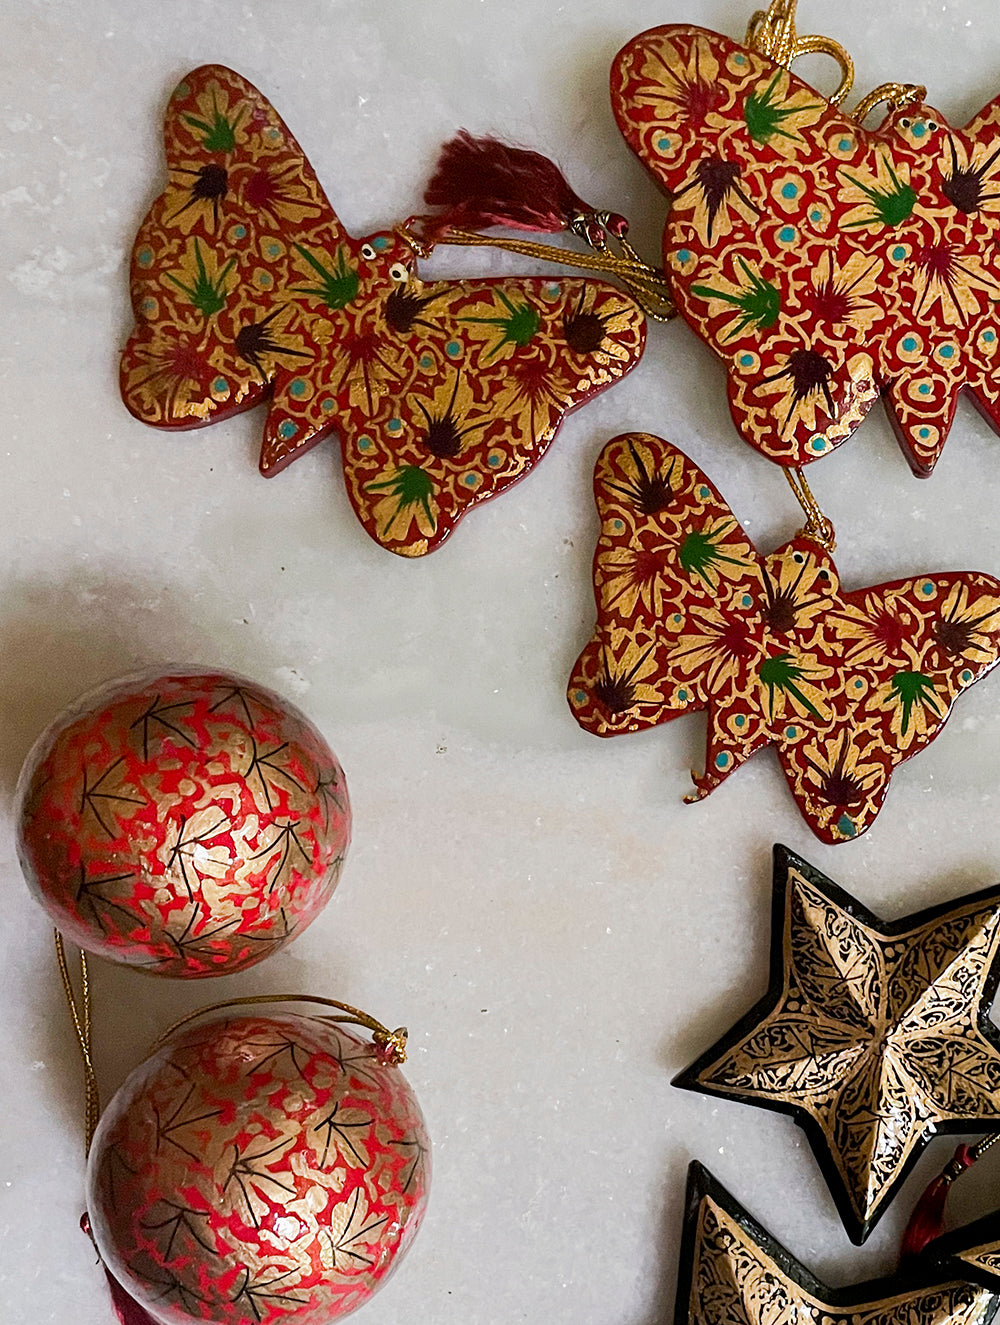 Load image into Gallery viewer, Kashmiri Art Xmas Decorations - Set of 8 (3 Stars, 3 Butterflies, 2 Baubles)